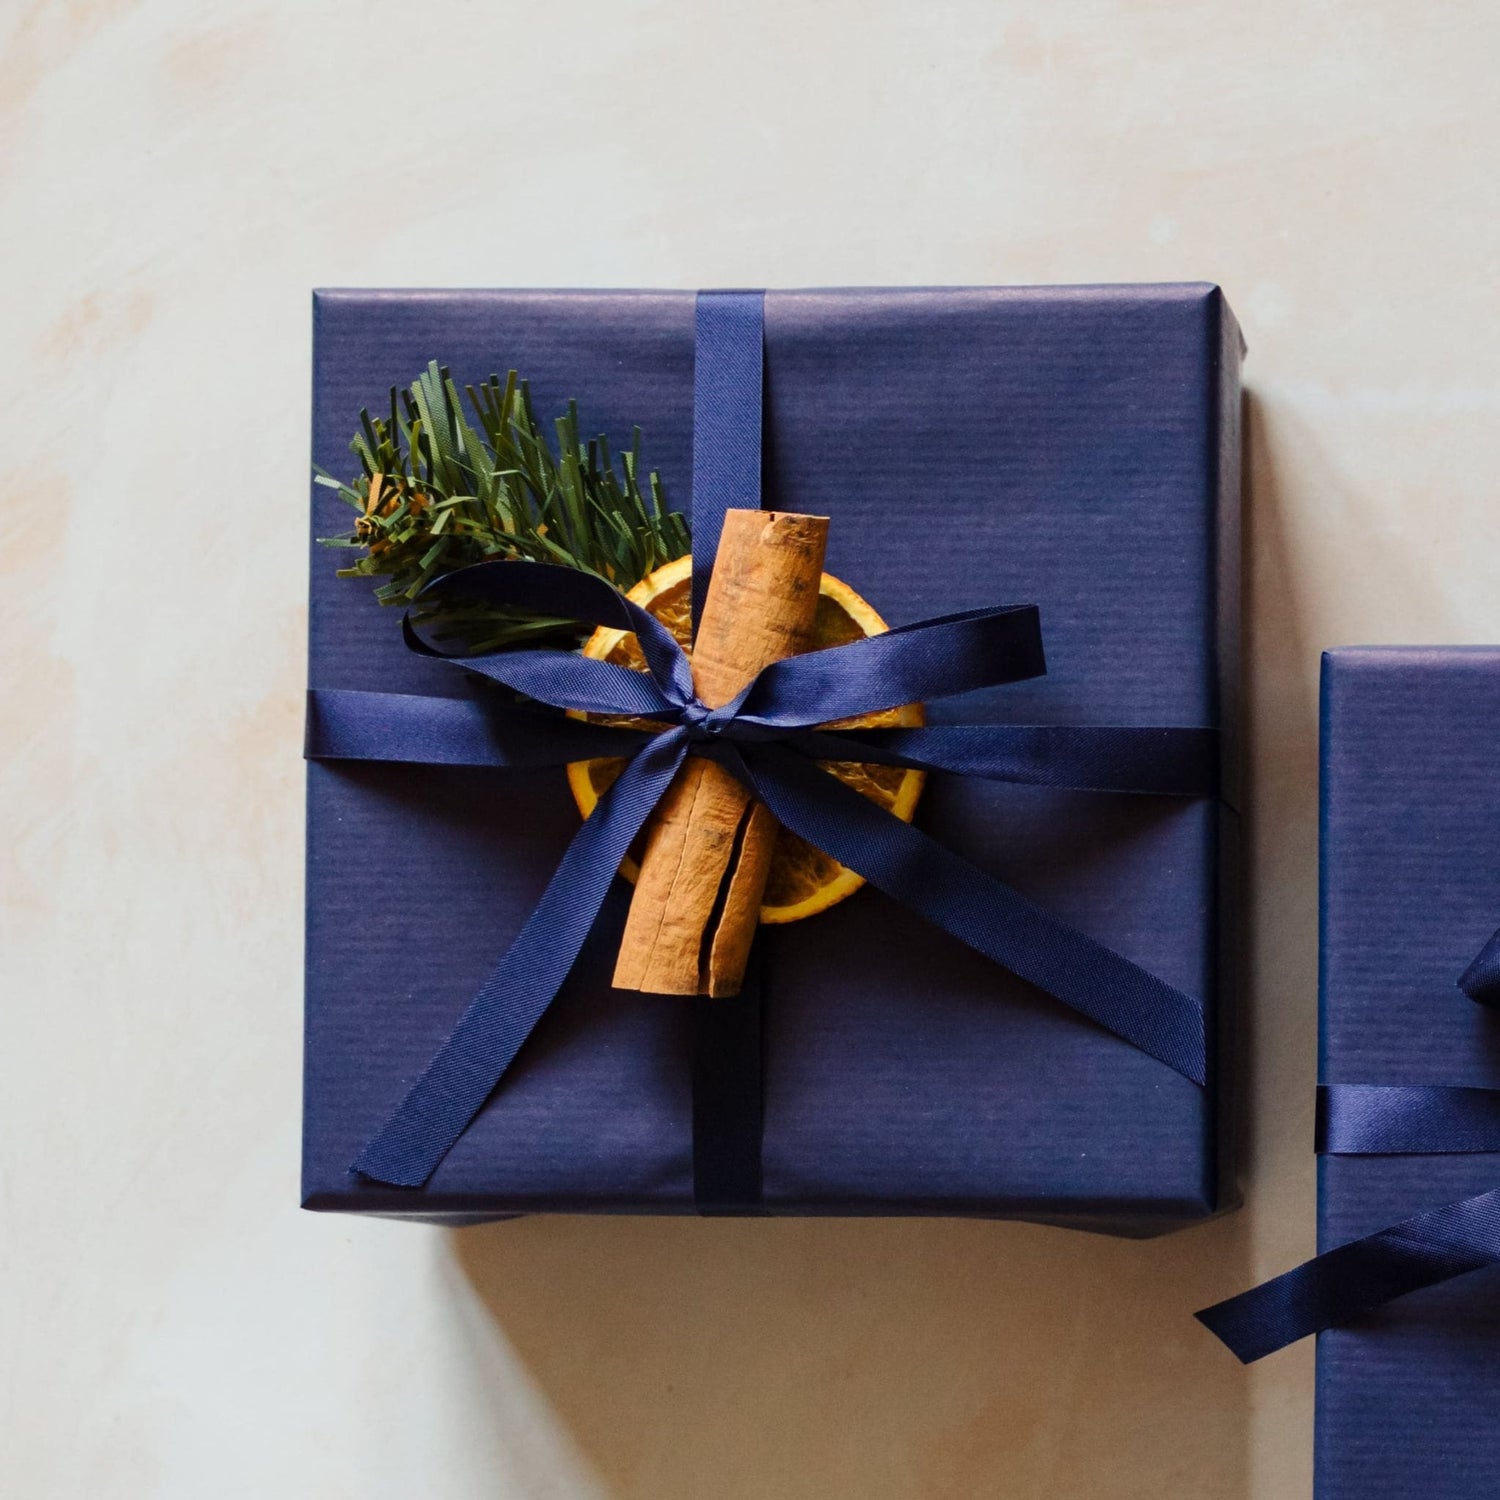 A 400g seaweed scented 3 wick soy candle from the Home County Co. is shown with luxury Christmas Gift Wrap. The 3 wick candle is wrapped in luxury navy wrapping paper secured with navy ribbon and Christmas embellishments.